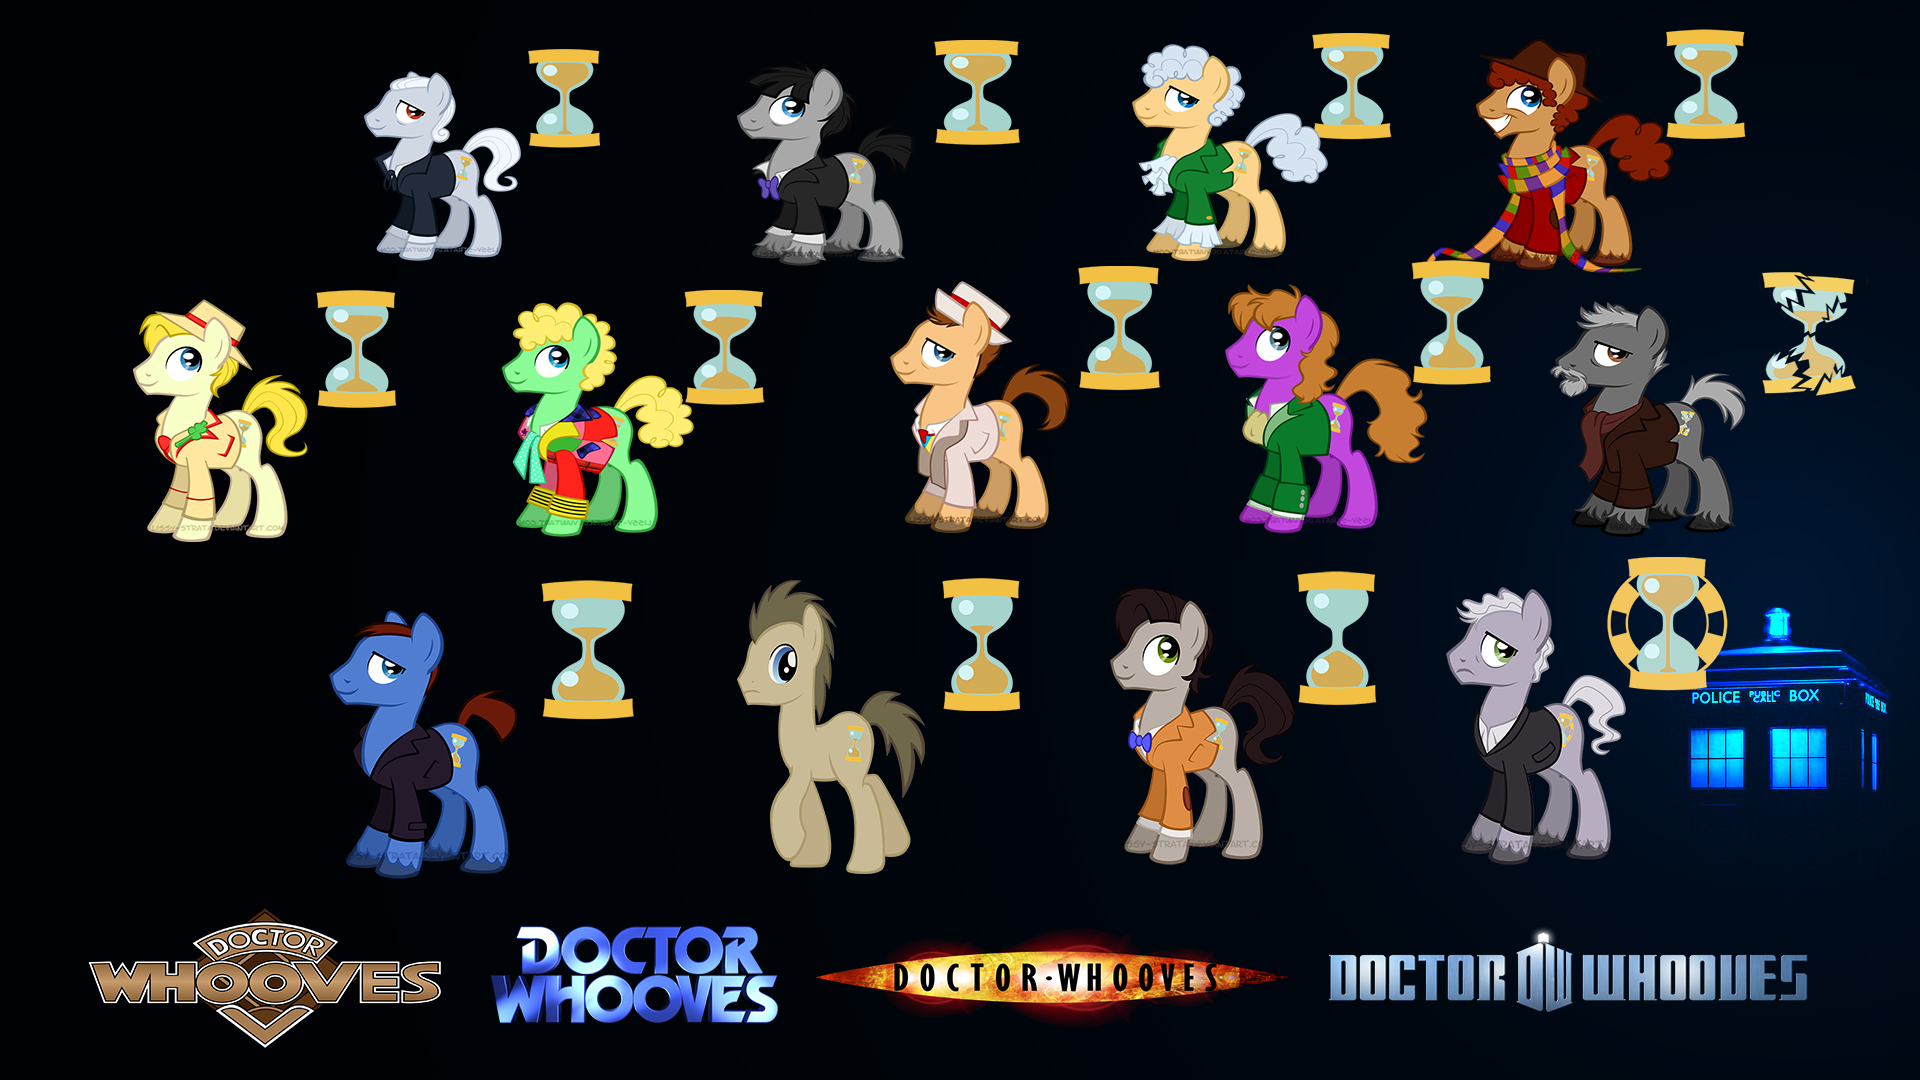 Doctor Whooves Wallpaper All Doctors By Brunomu